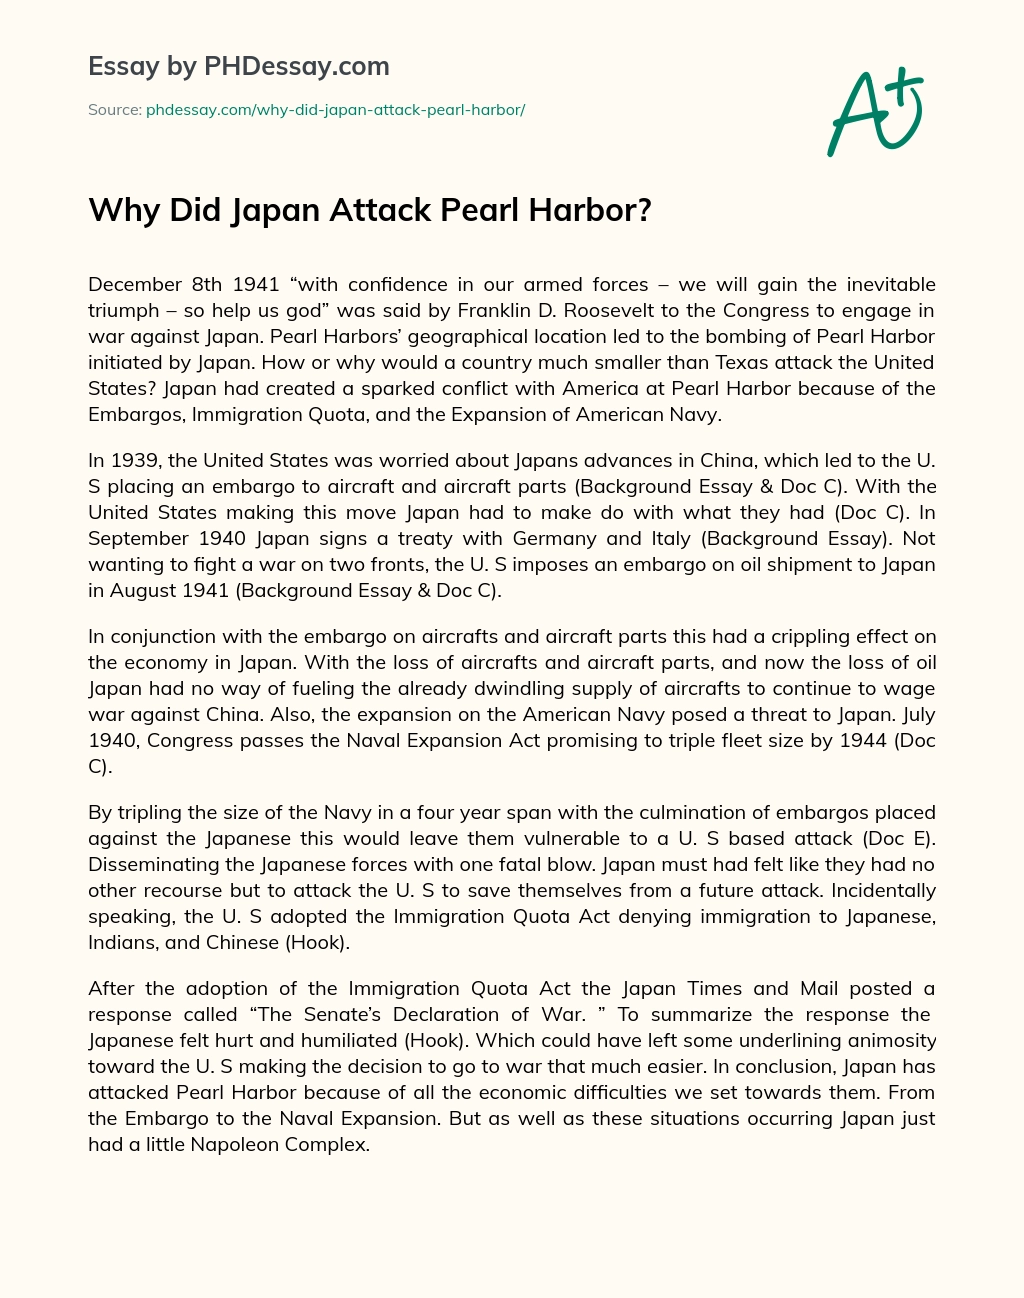 Why Did Japan Attack Pearl Harbor? essay